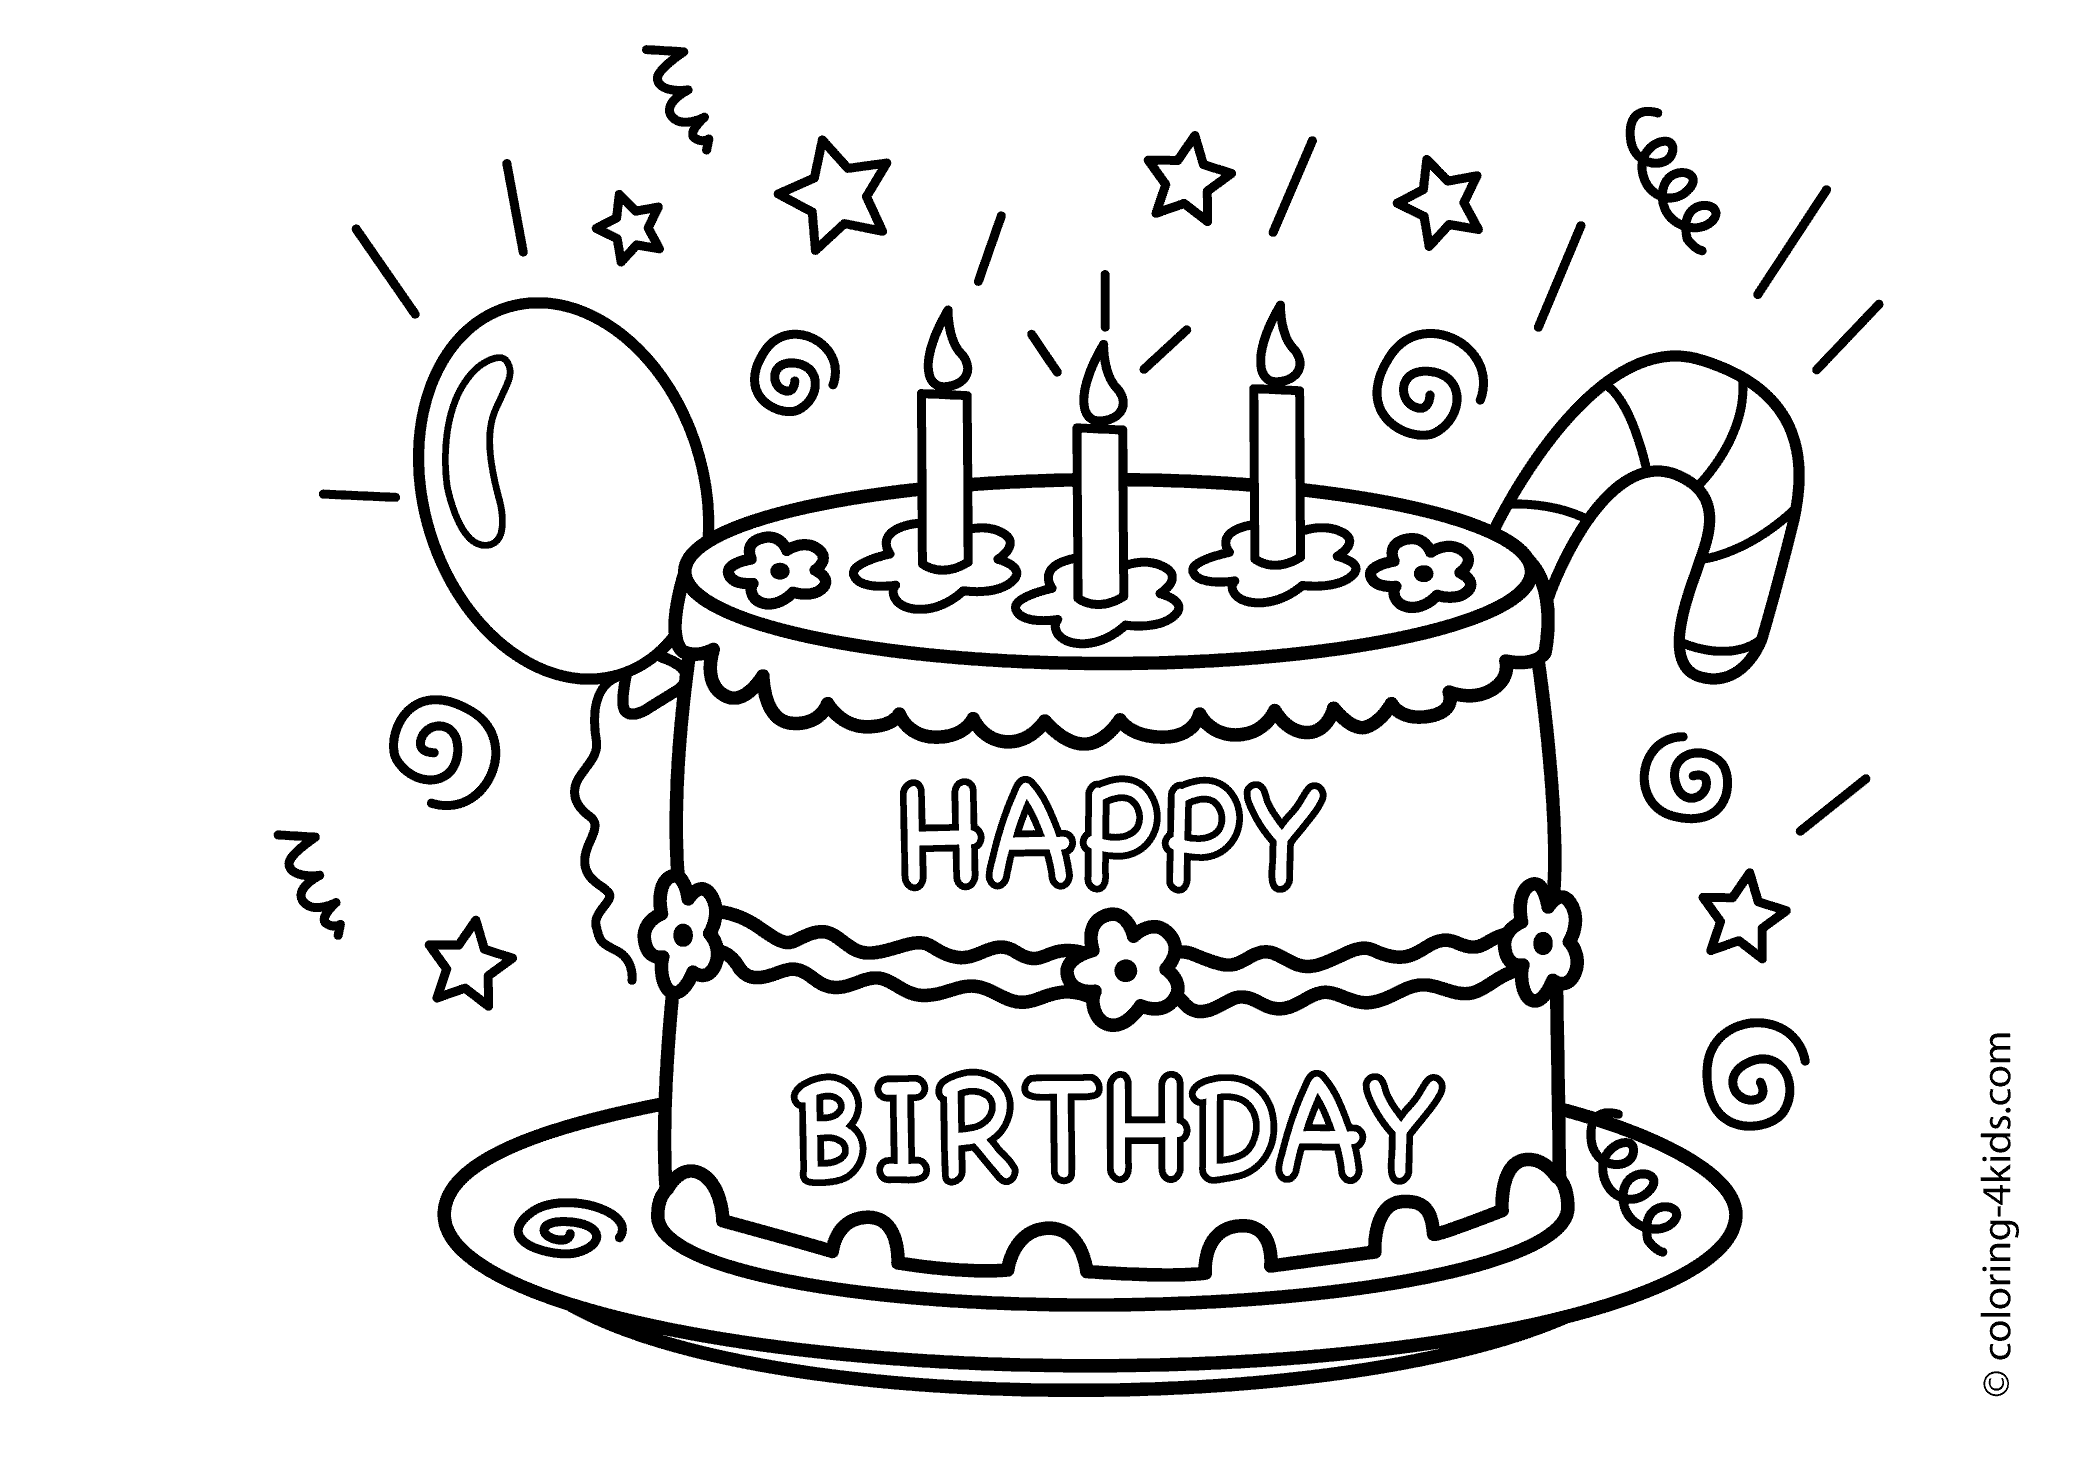 Teddy Bear Birthday Cake Coloring Pages. Birthday Cake